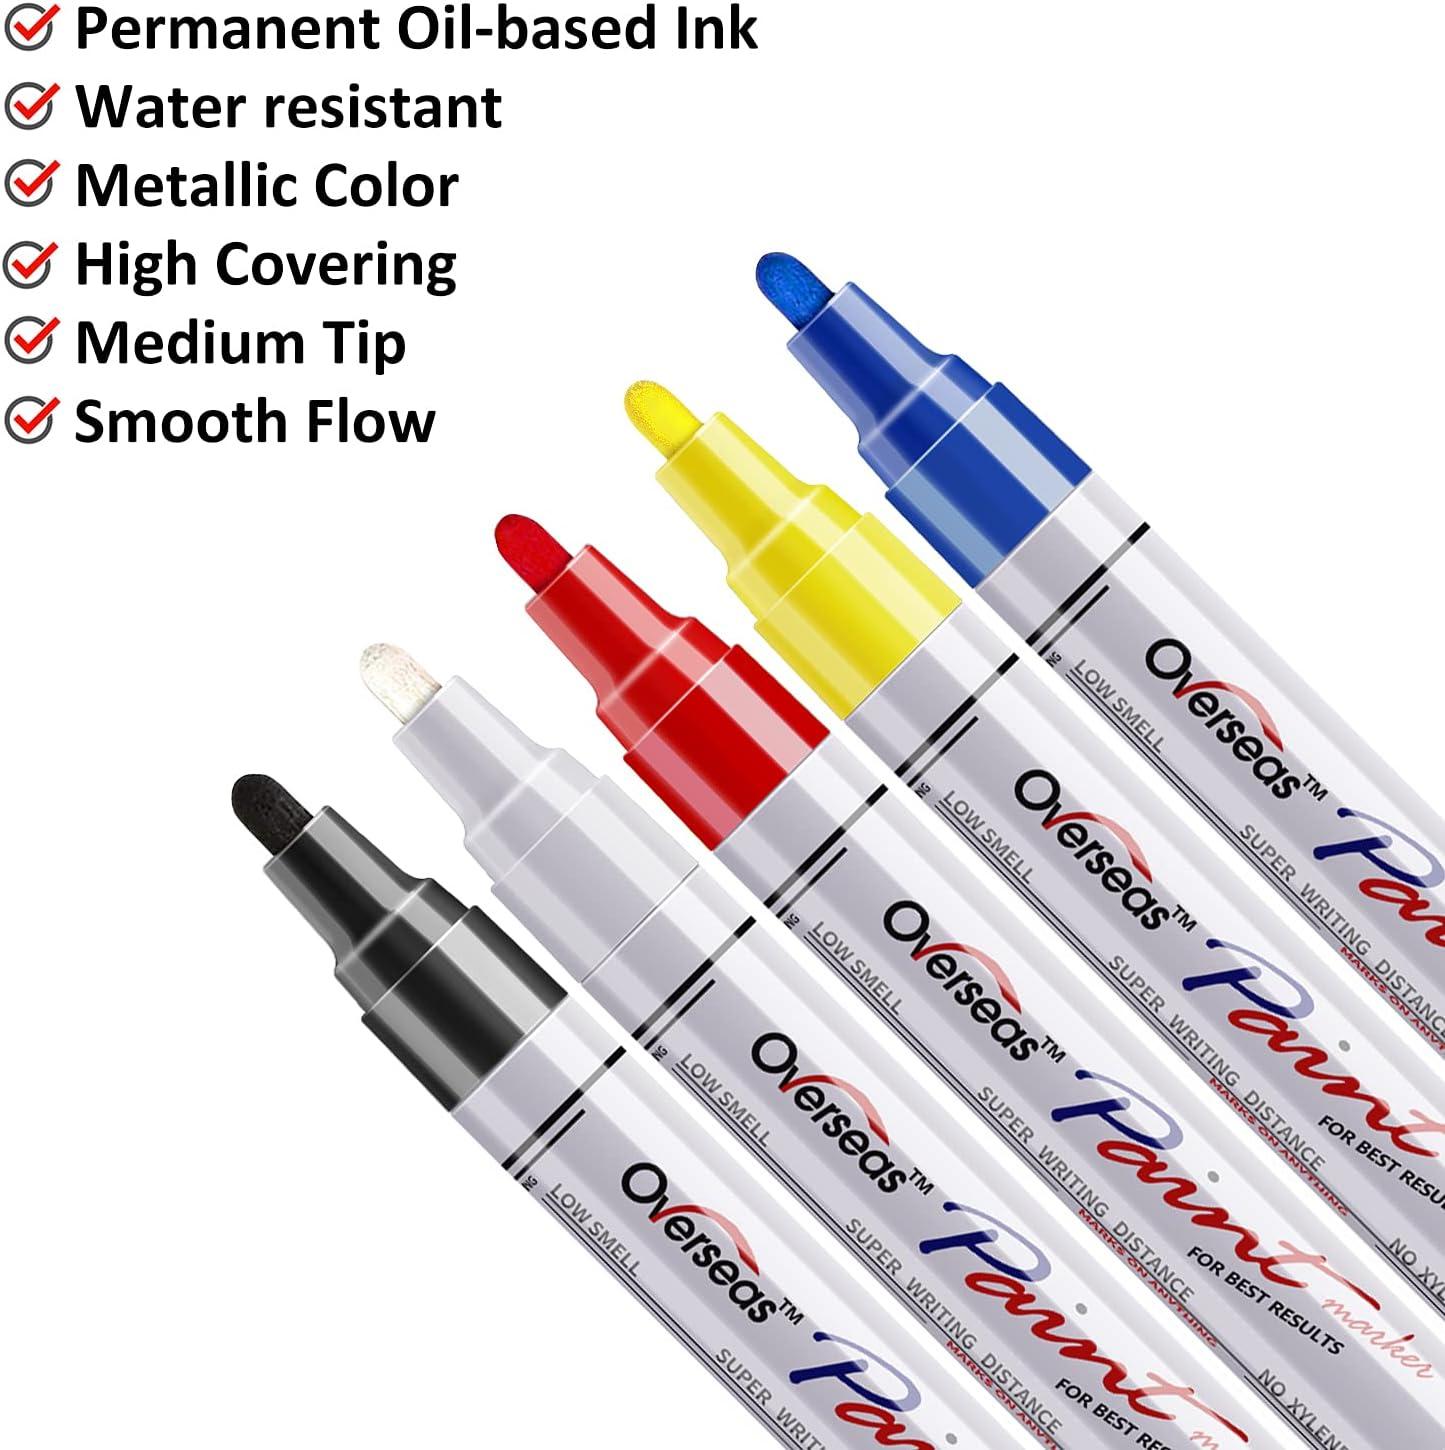 SHARPIE Oil-Based Paint Markers, Medium Point, Assorted & Metallic Colors,  5 Count - Great for Rock Painting